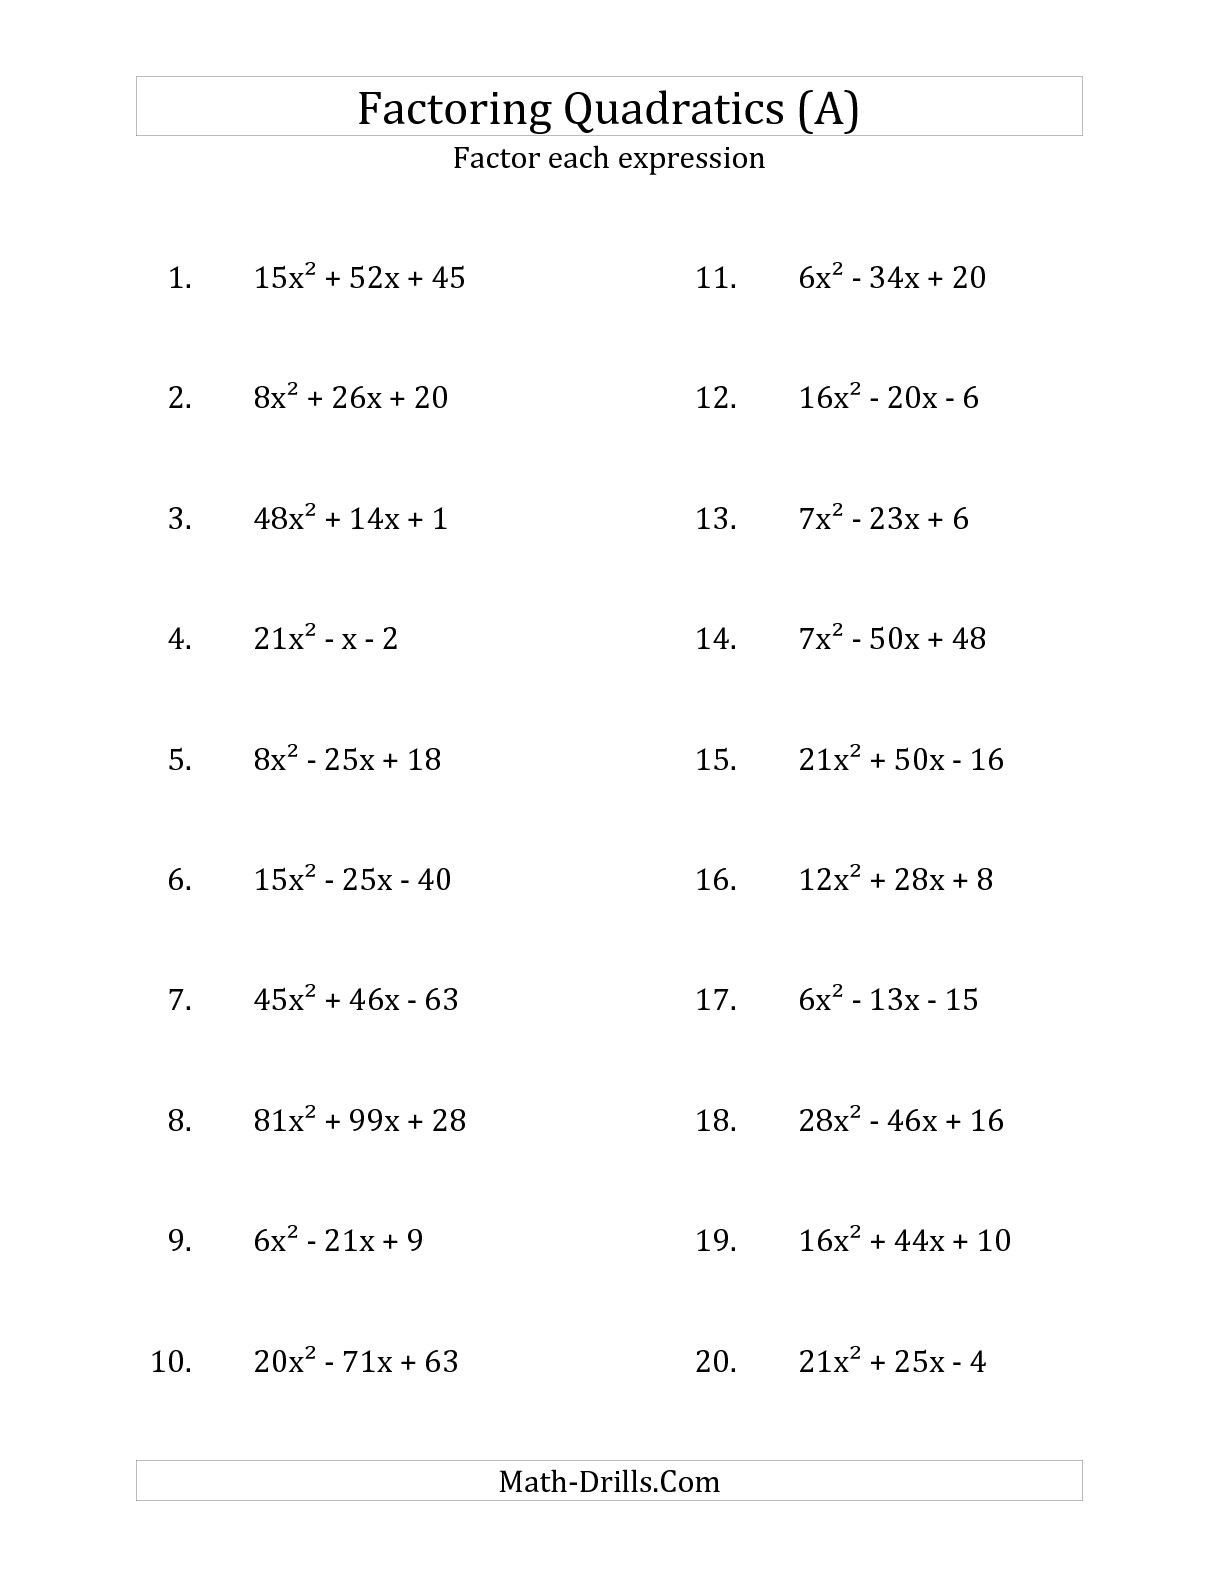 Factoring Polynomials Worksheet Answers 32 Factoring Polynomials Worksheet with Answers Worksheet